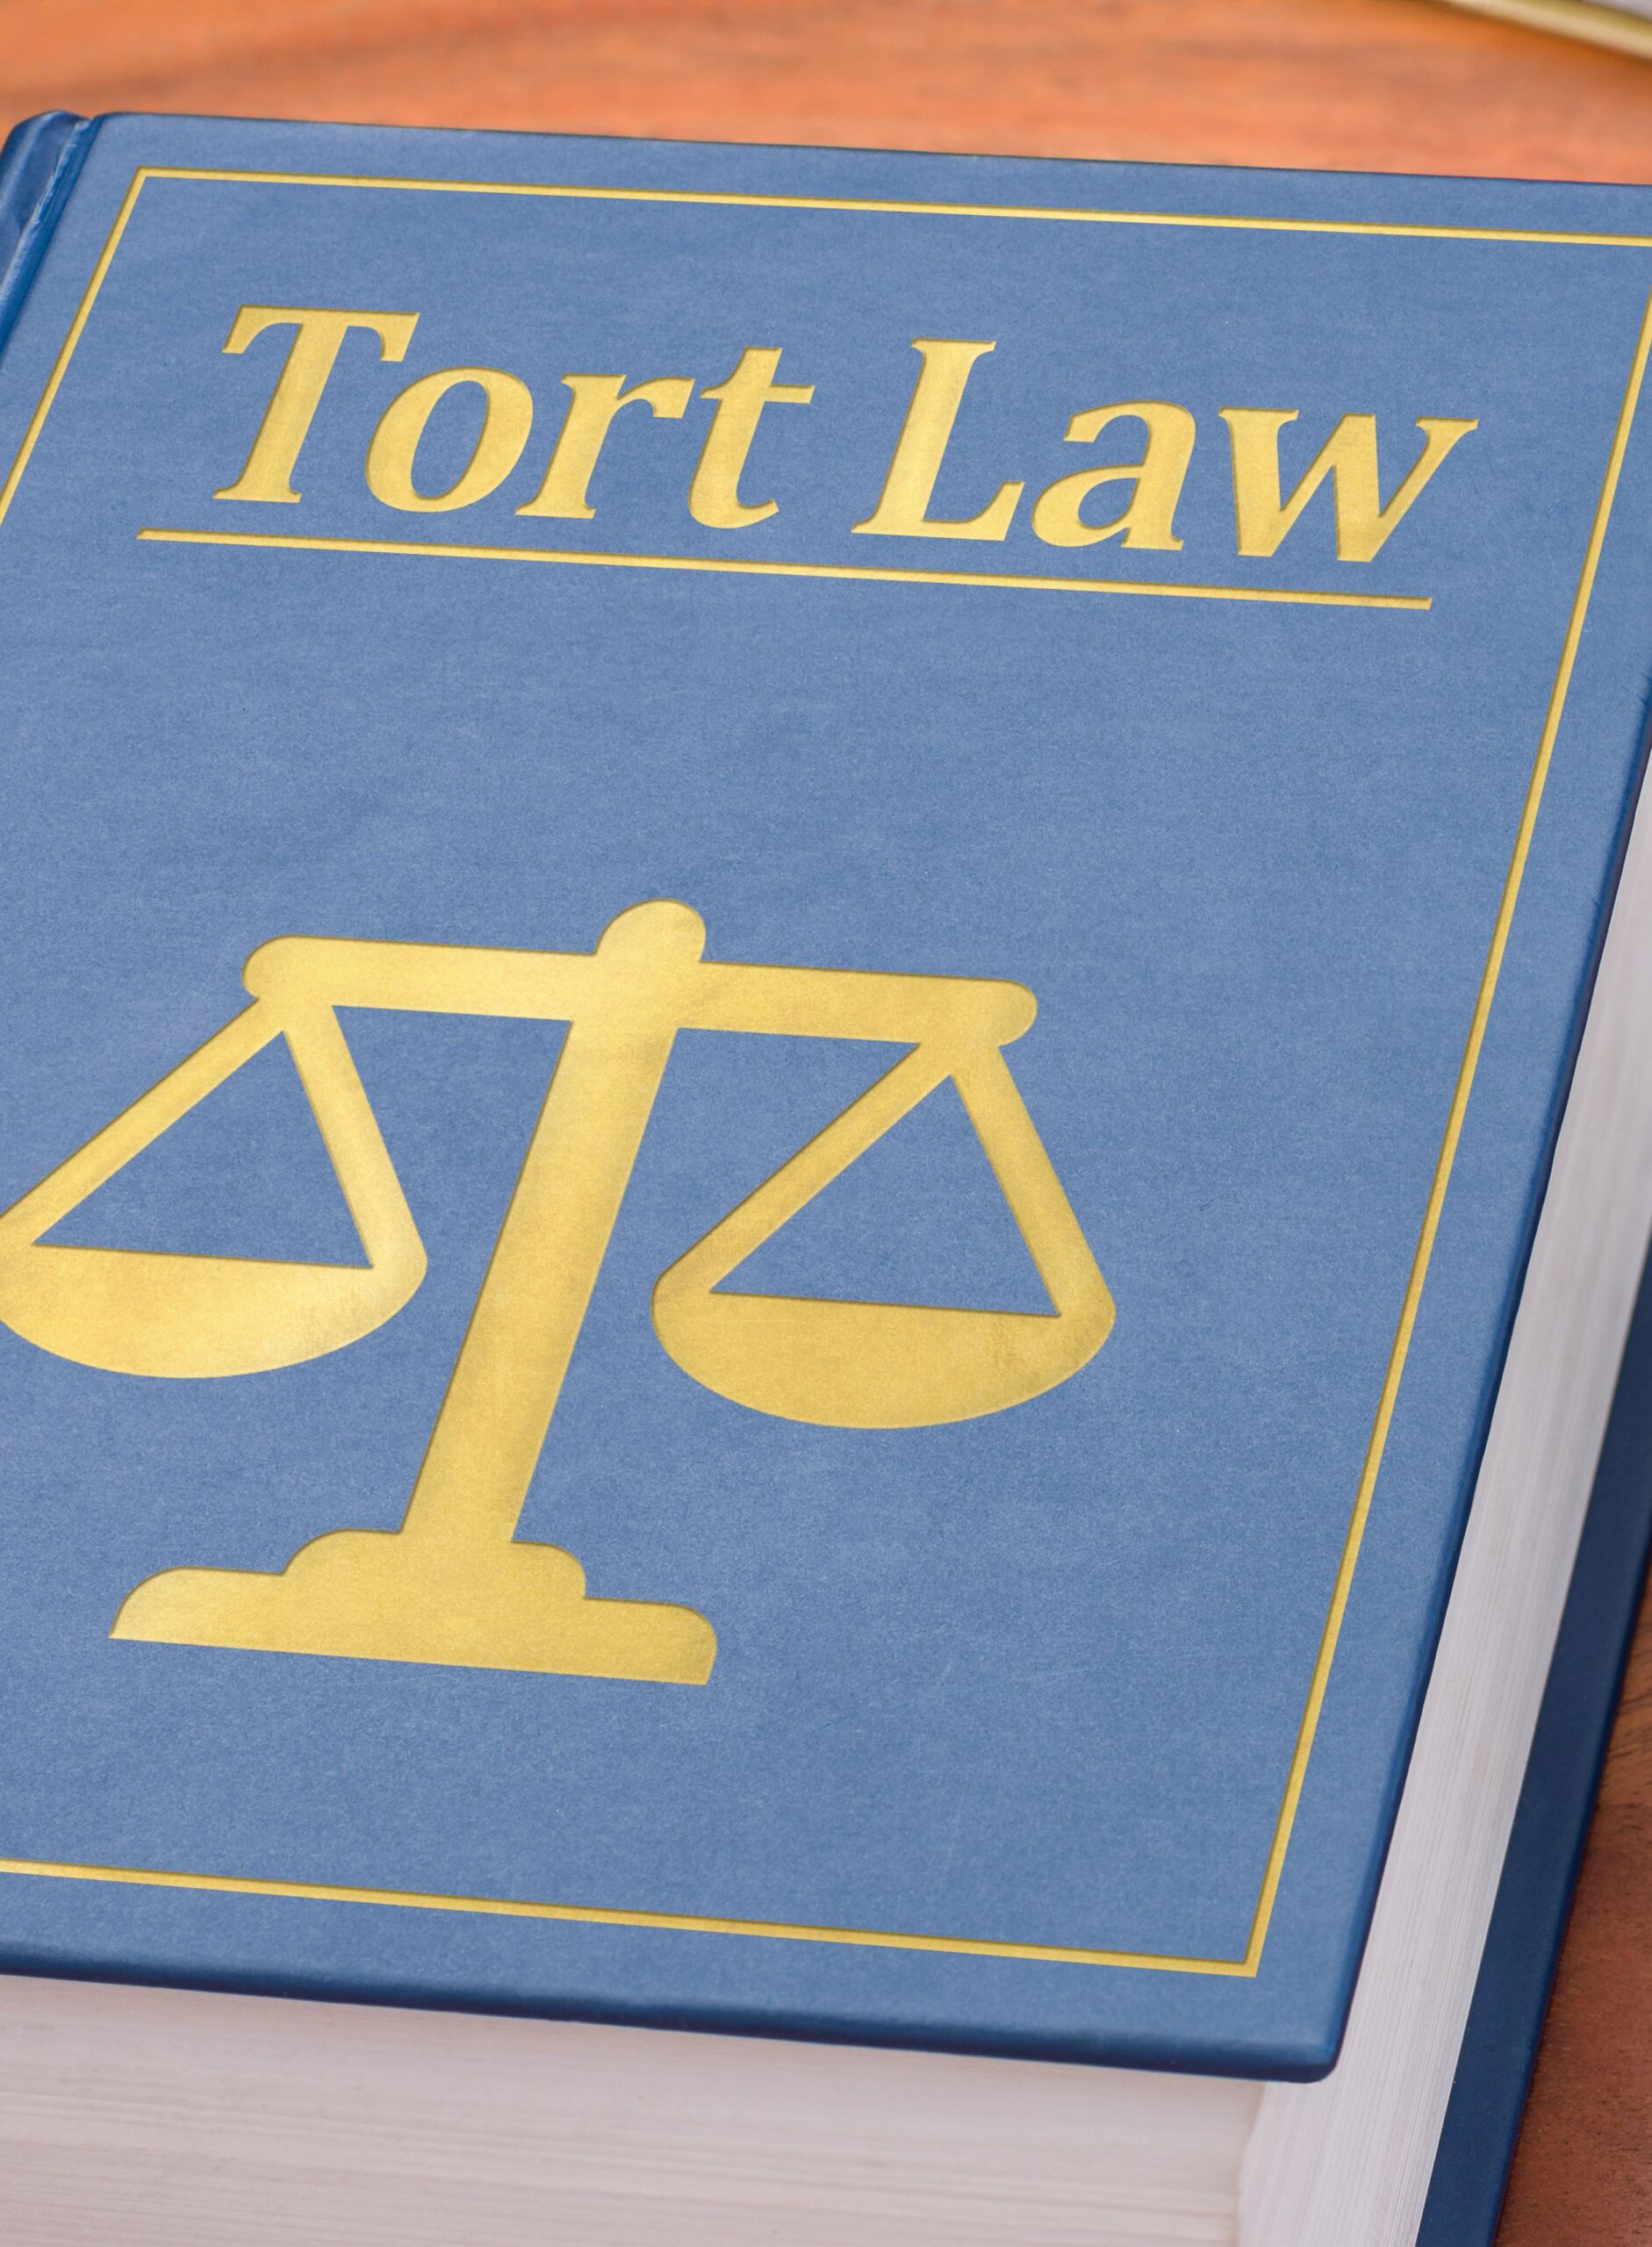 A book titled "Tort Law" prominently displayed, highlighting the specialized focus of mass tort law firms.